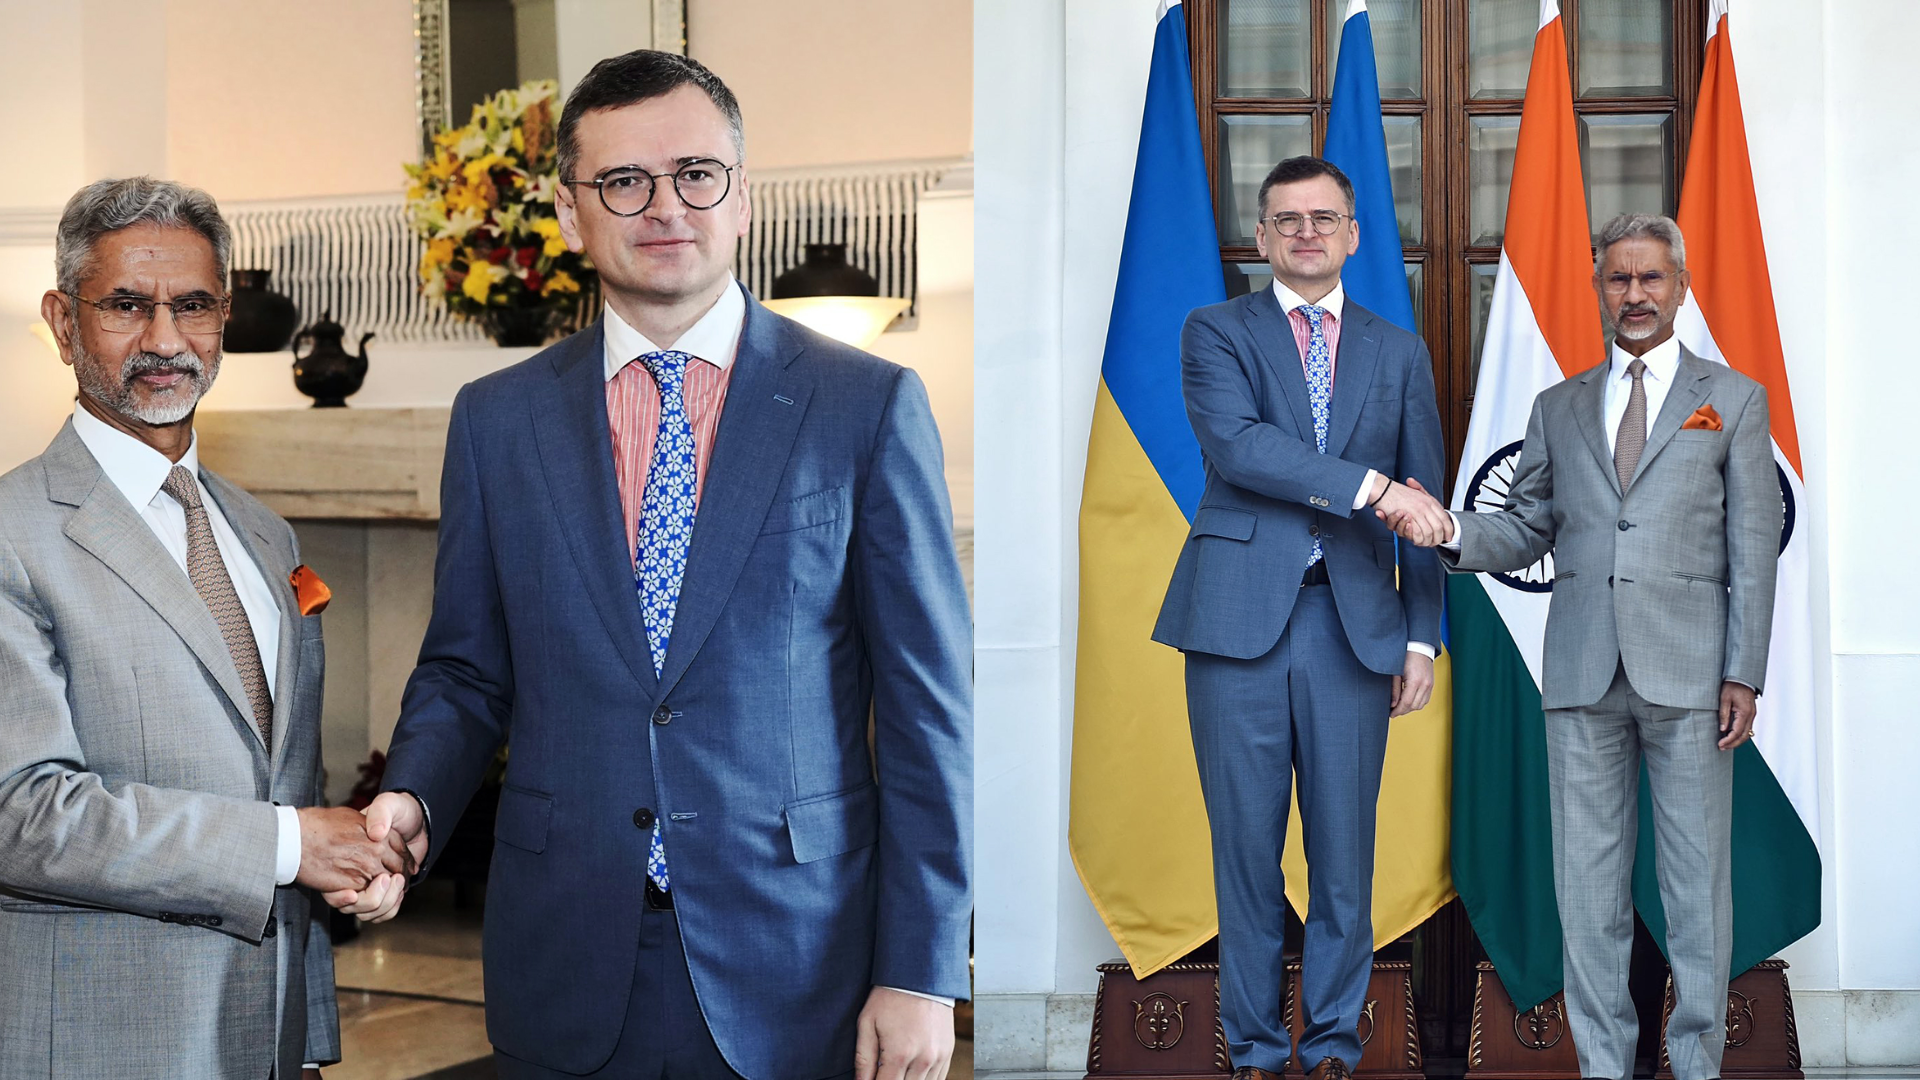 MEA: India-Ukraine Discuss Pursuit Of Peaceful Resolution In Moscow-Kyiv Conflict During FM Kuleba’s Visit